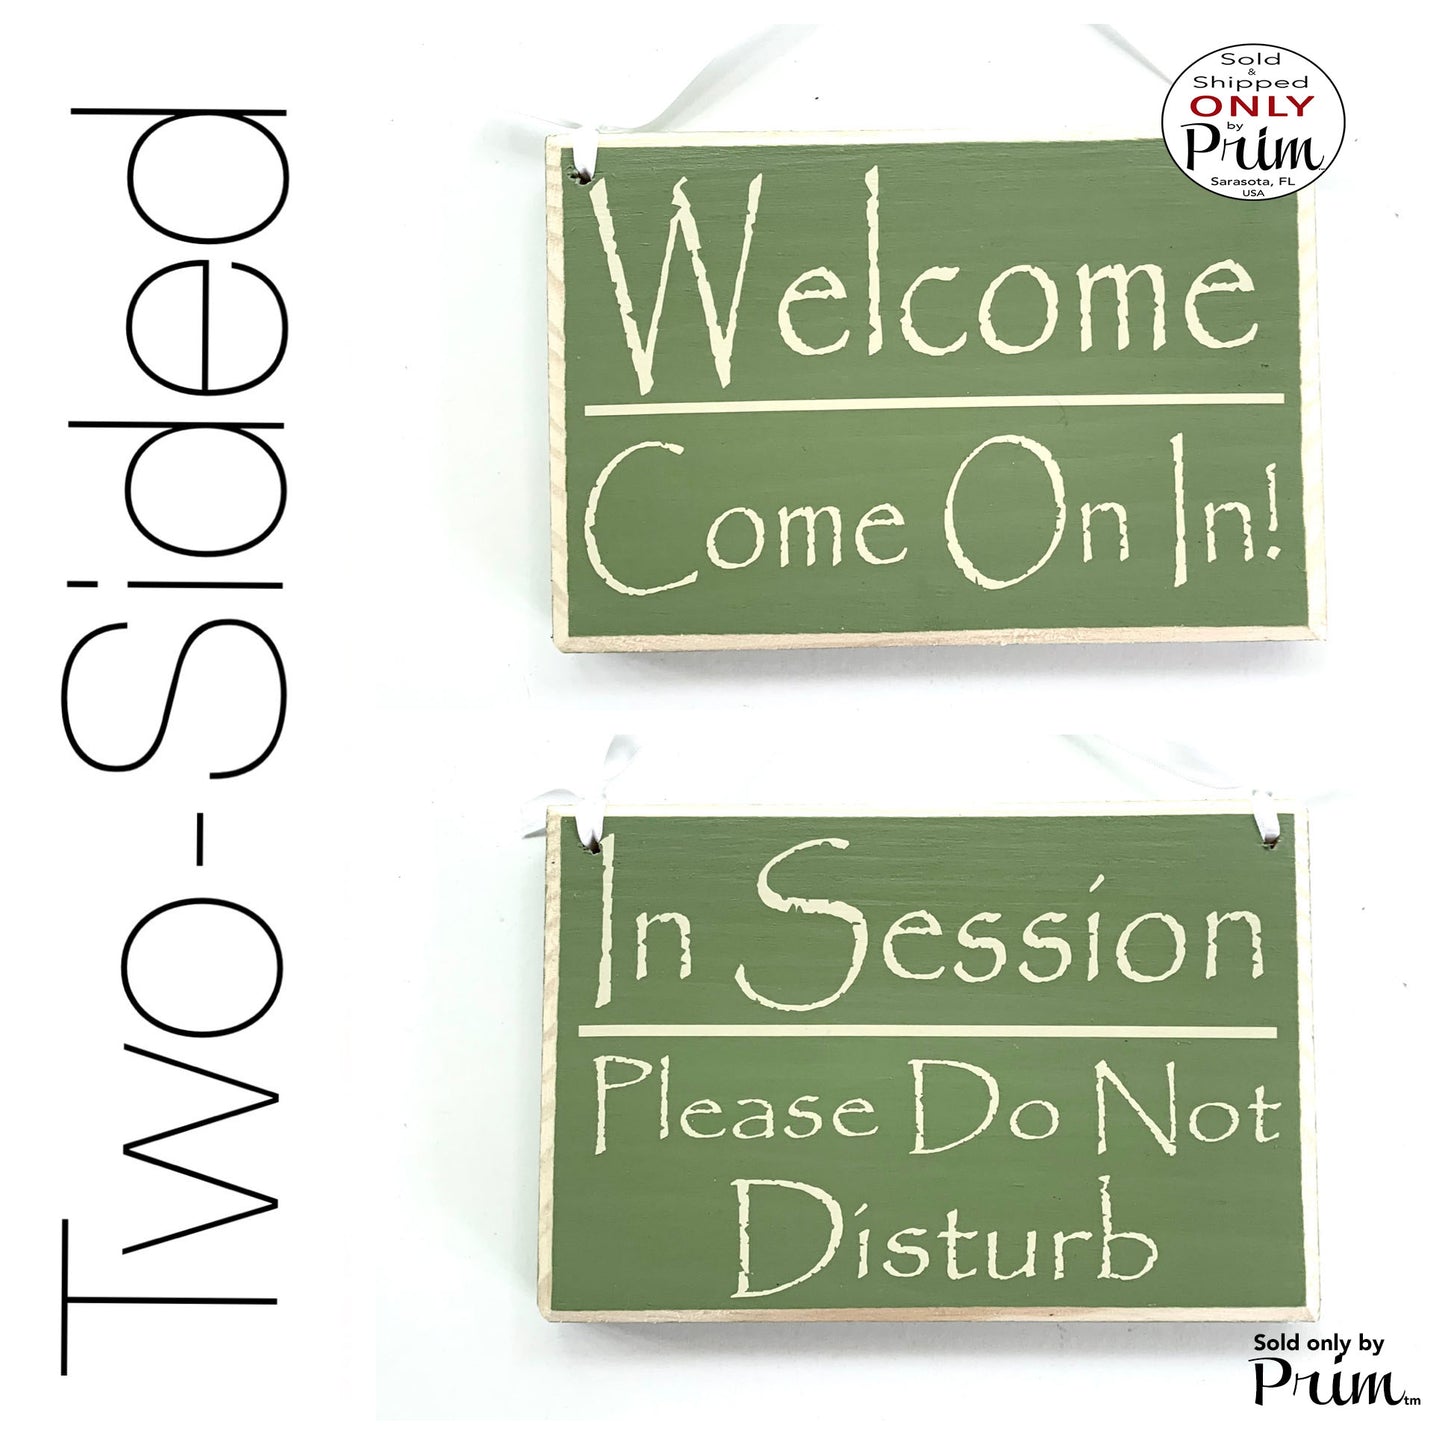 8x6 In Session Please Do Not Disturb Welcome Come on in Custom Wood Sign Meeting Treatment In Progress Spa Salon Therapy Office Door Hanger Designs by Prim